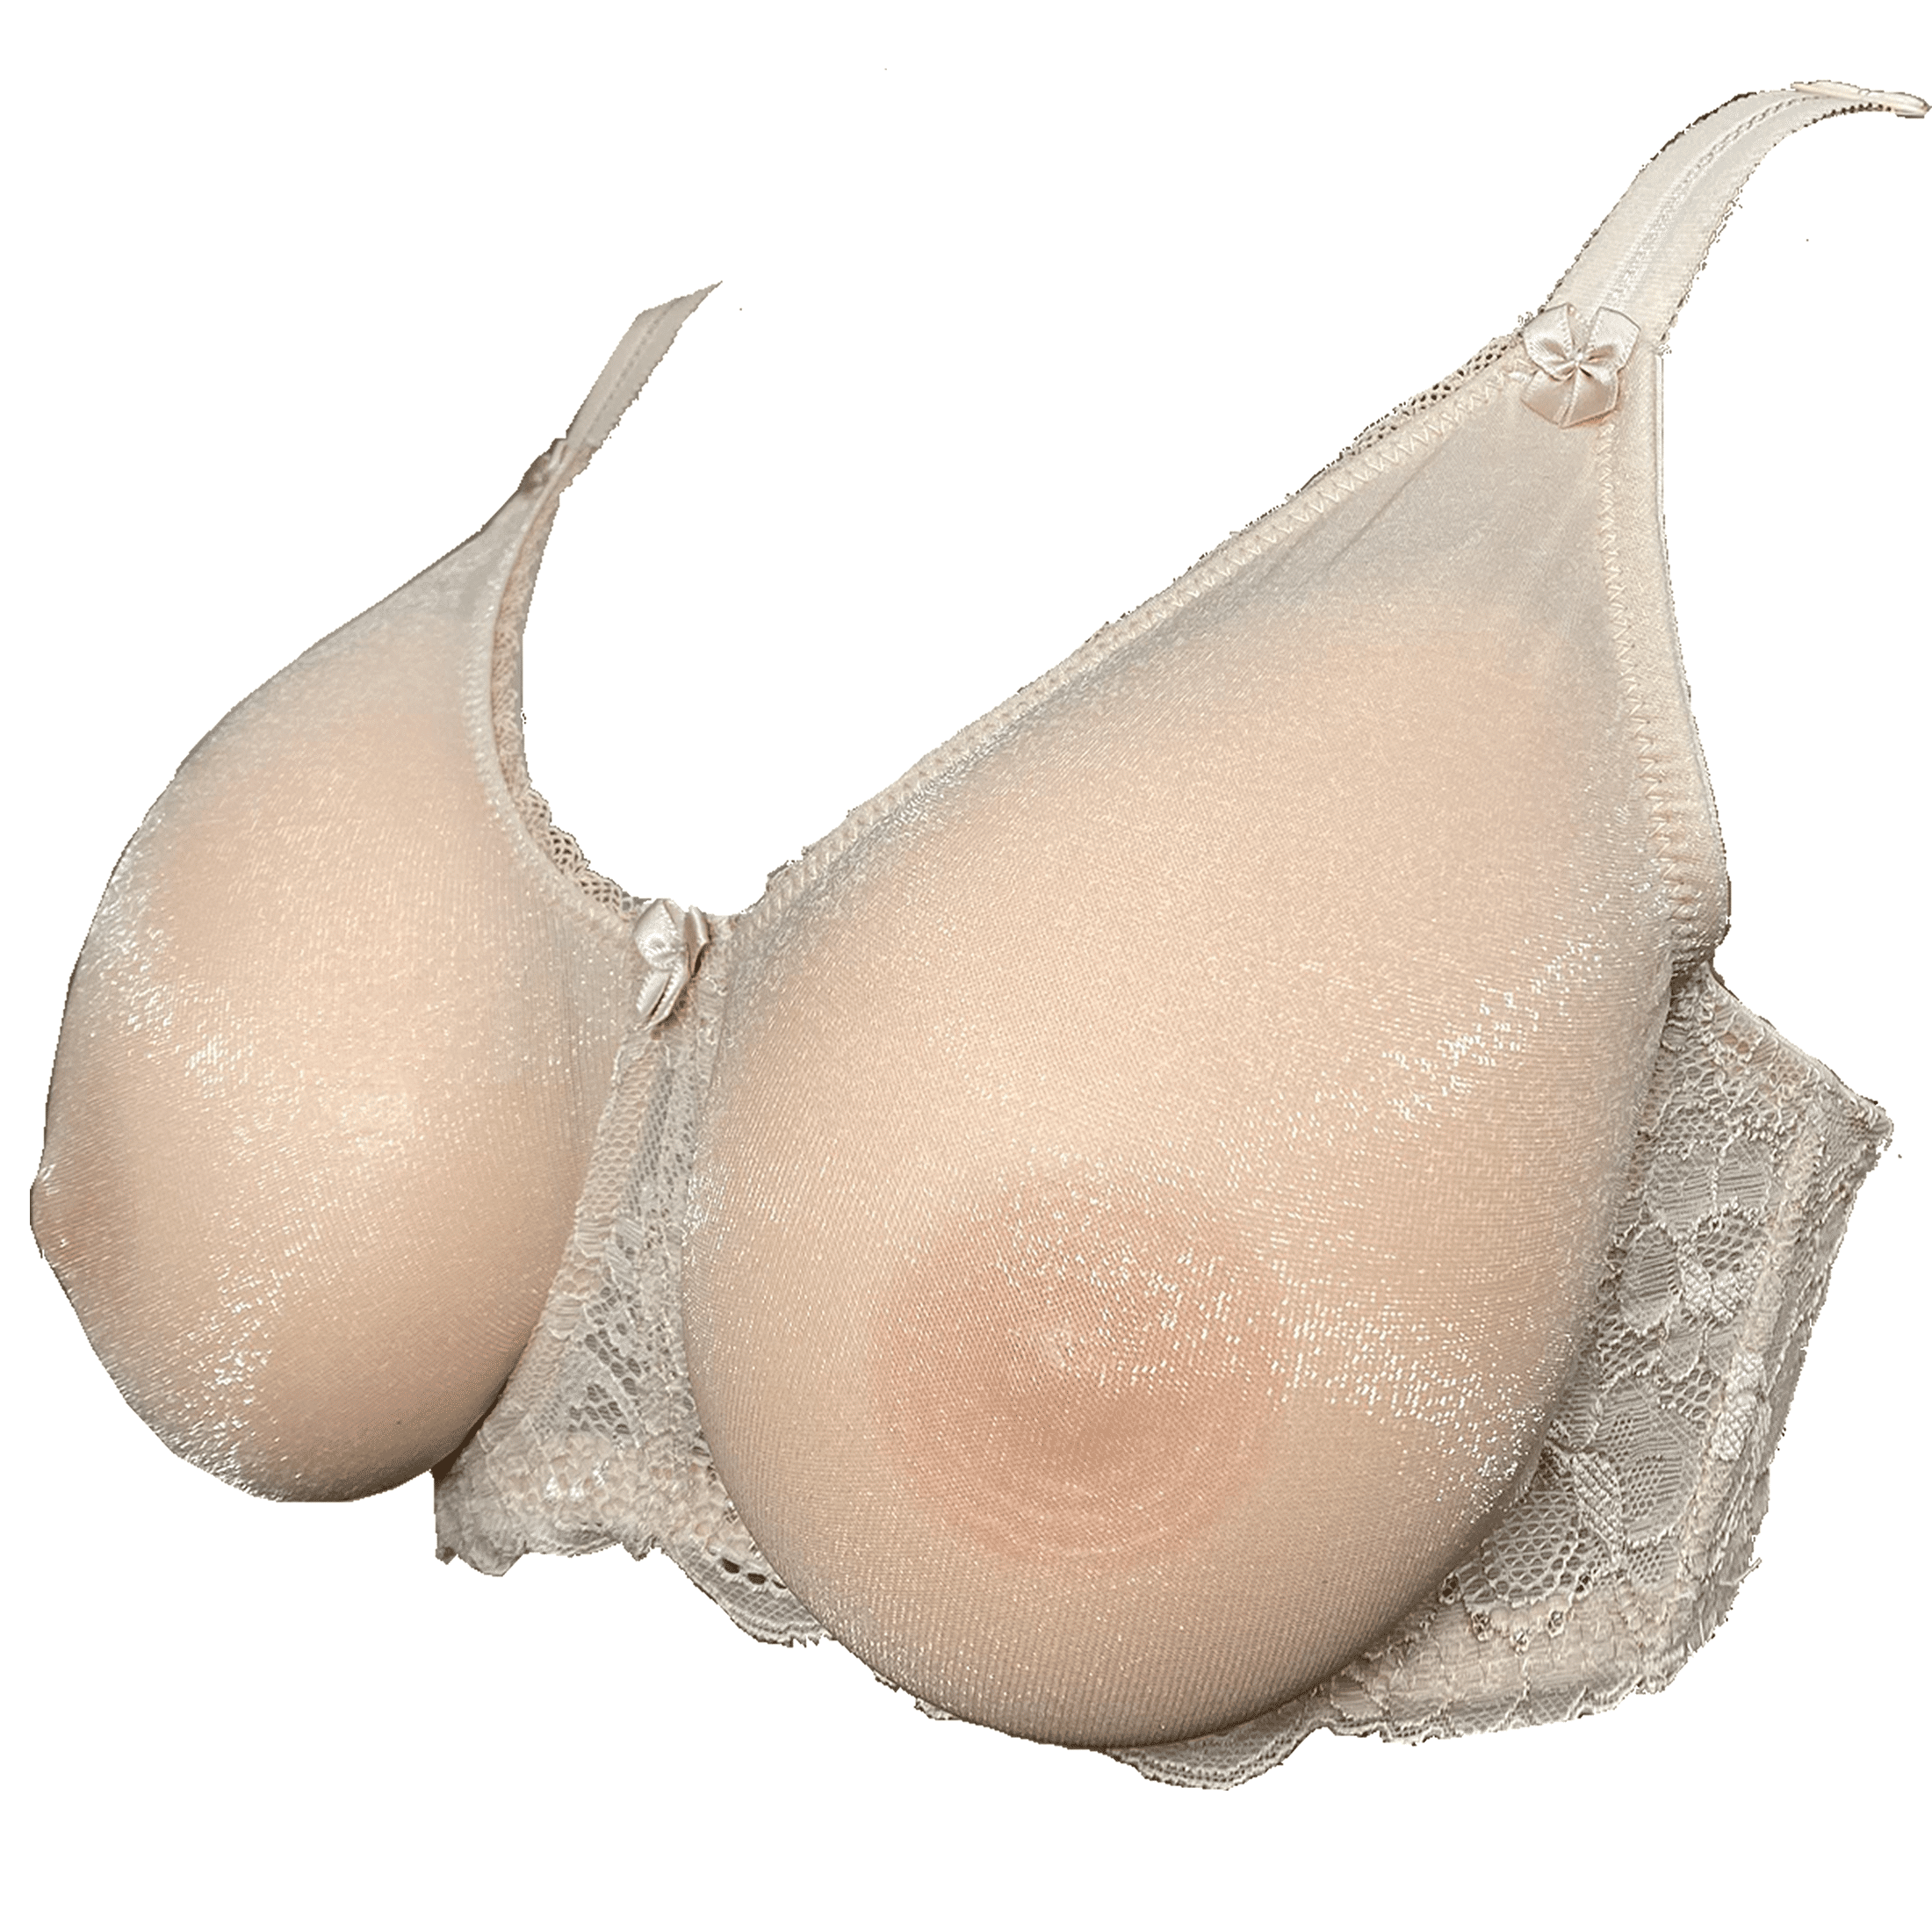 Breast Cancer Bras, Mastectomy Bras, Lace Breast Cancer Bras, Bras For  Mastectomy Patients